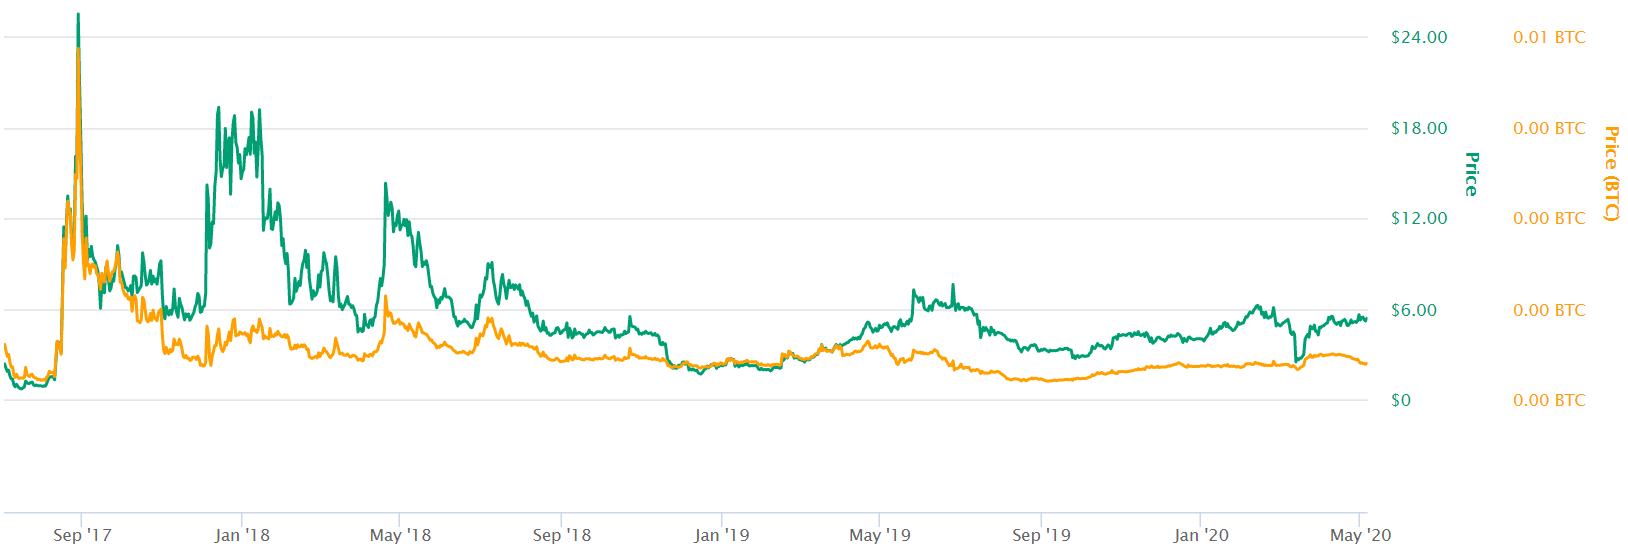 MCO Token Price in USD and BTC by CoinMarketCap